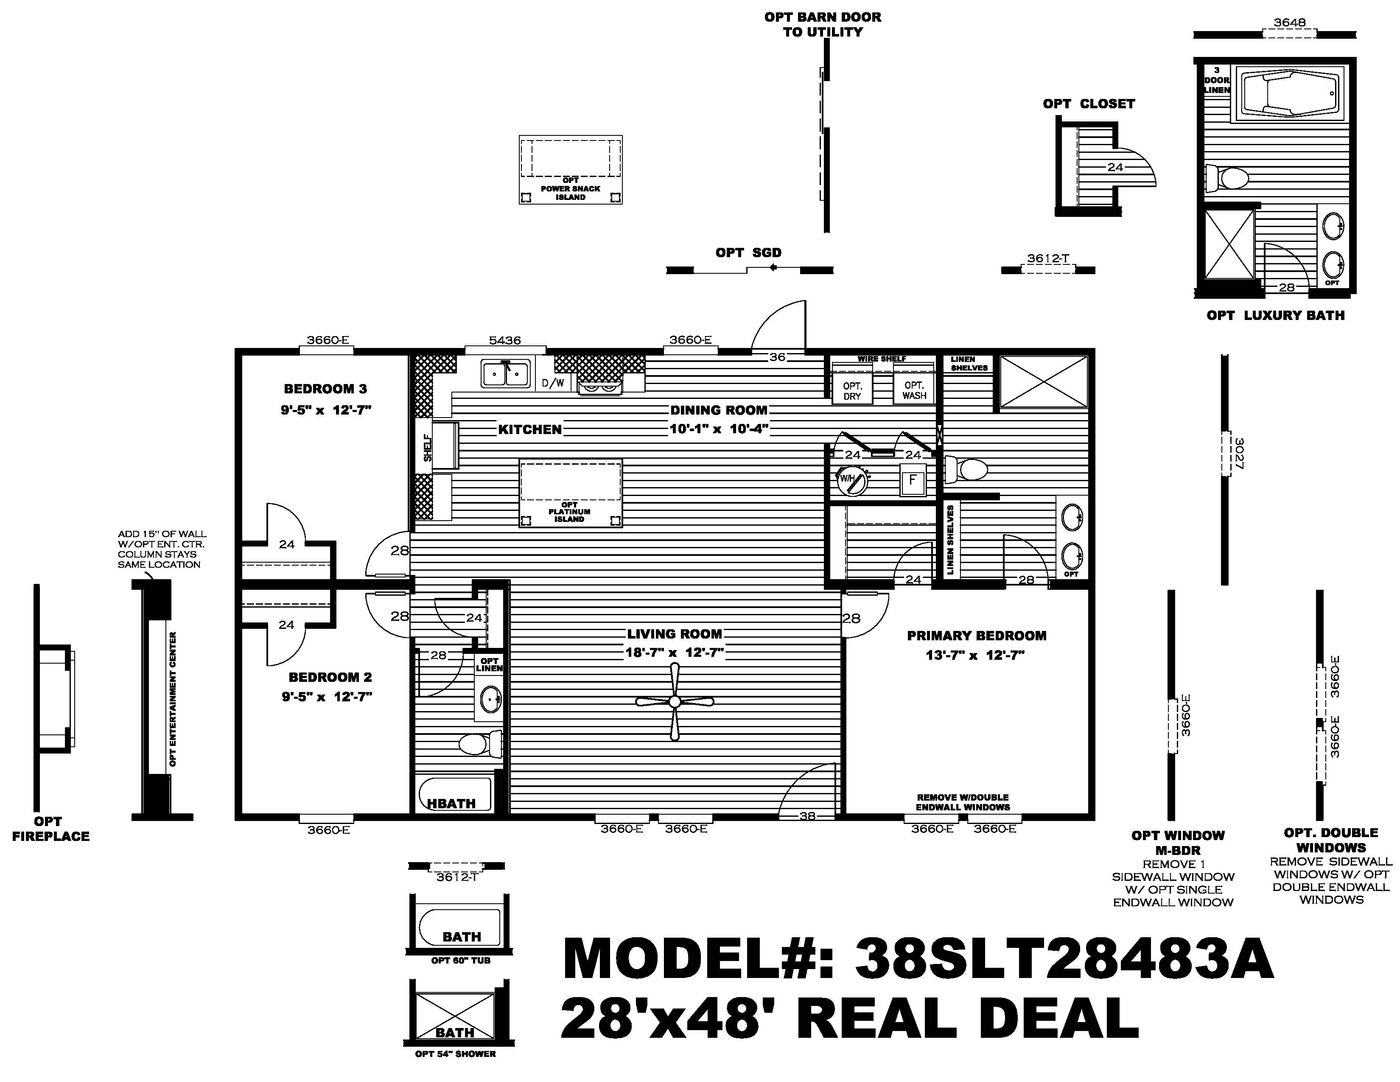 The Real Deal Floor Plan